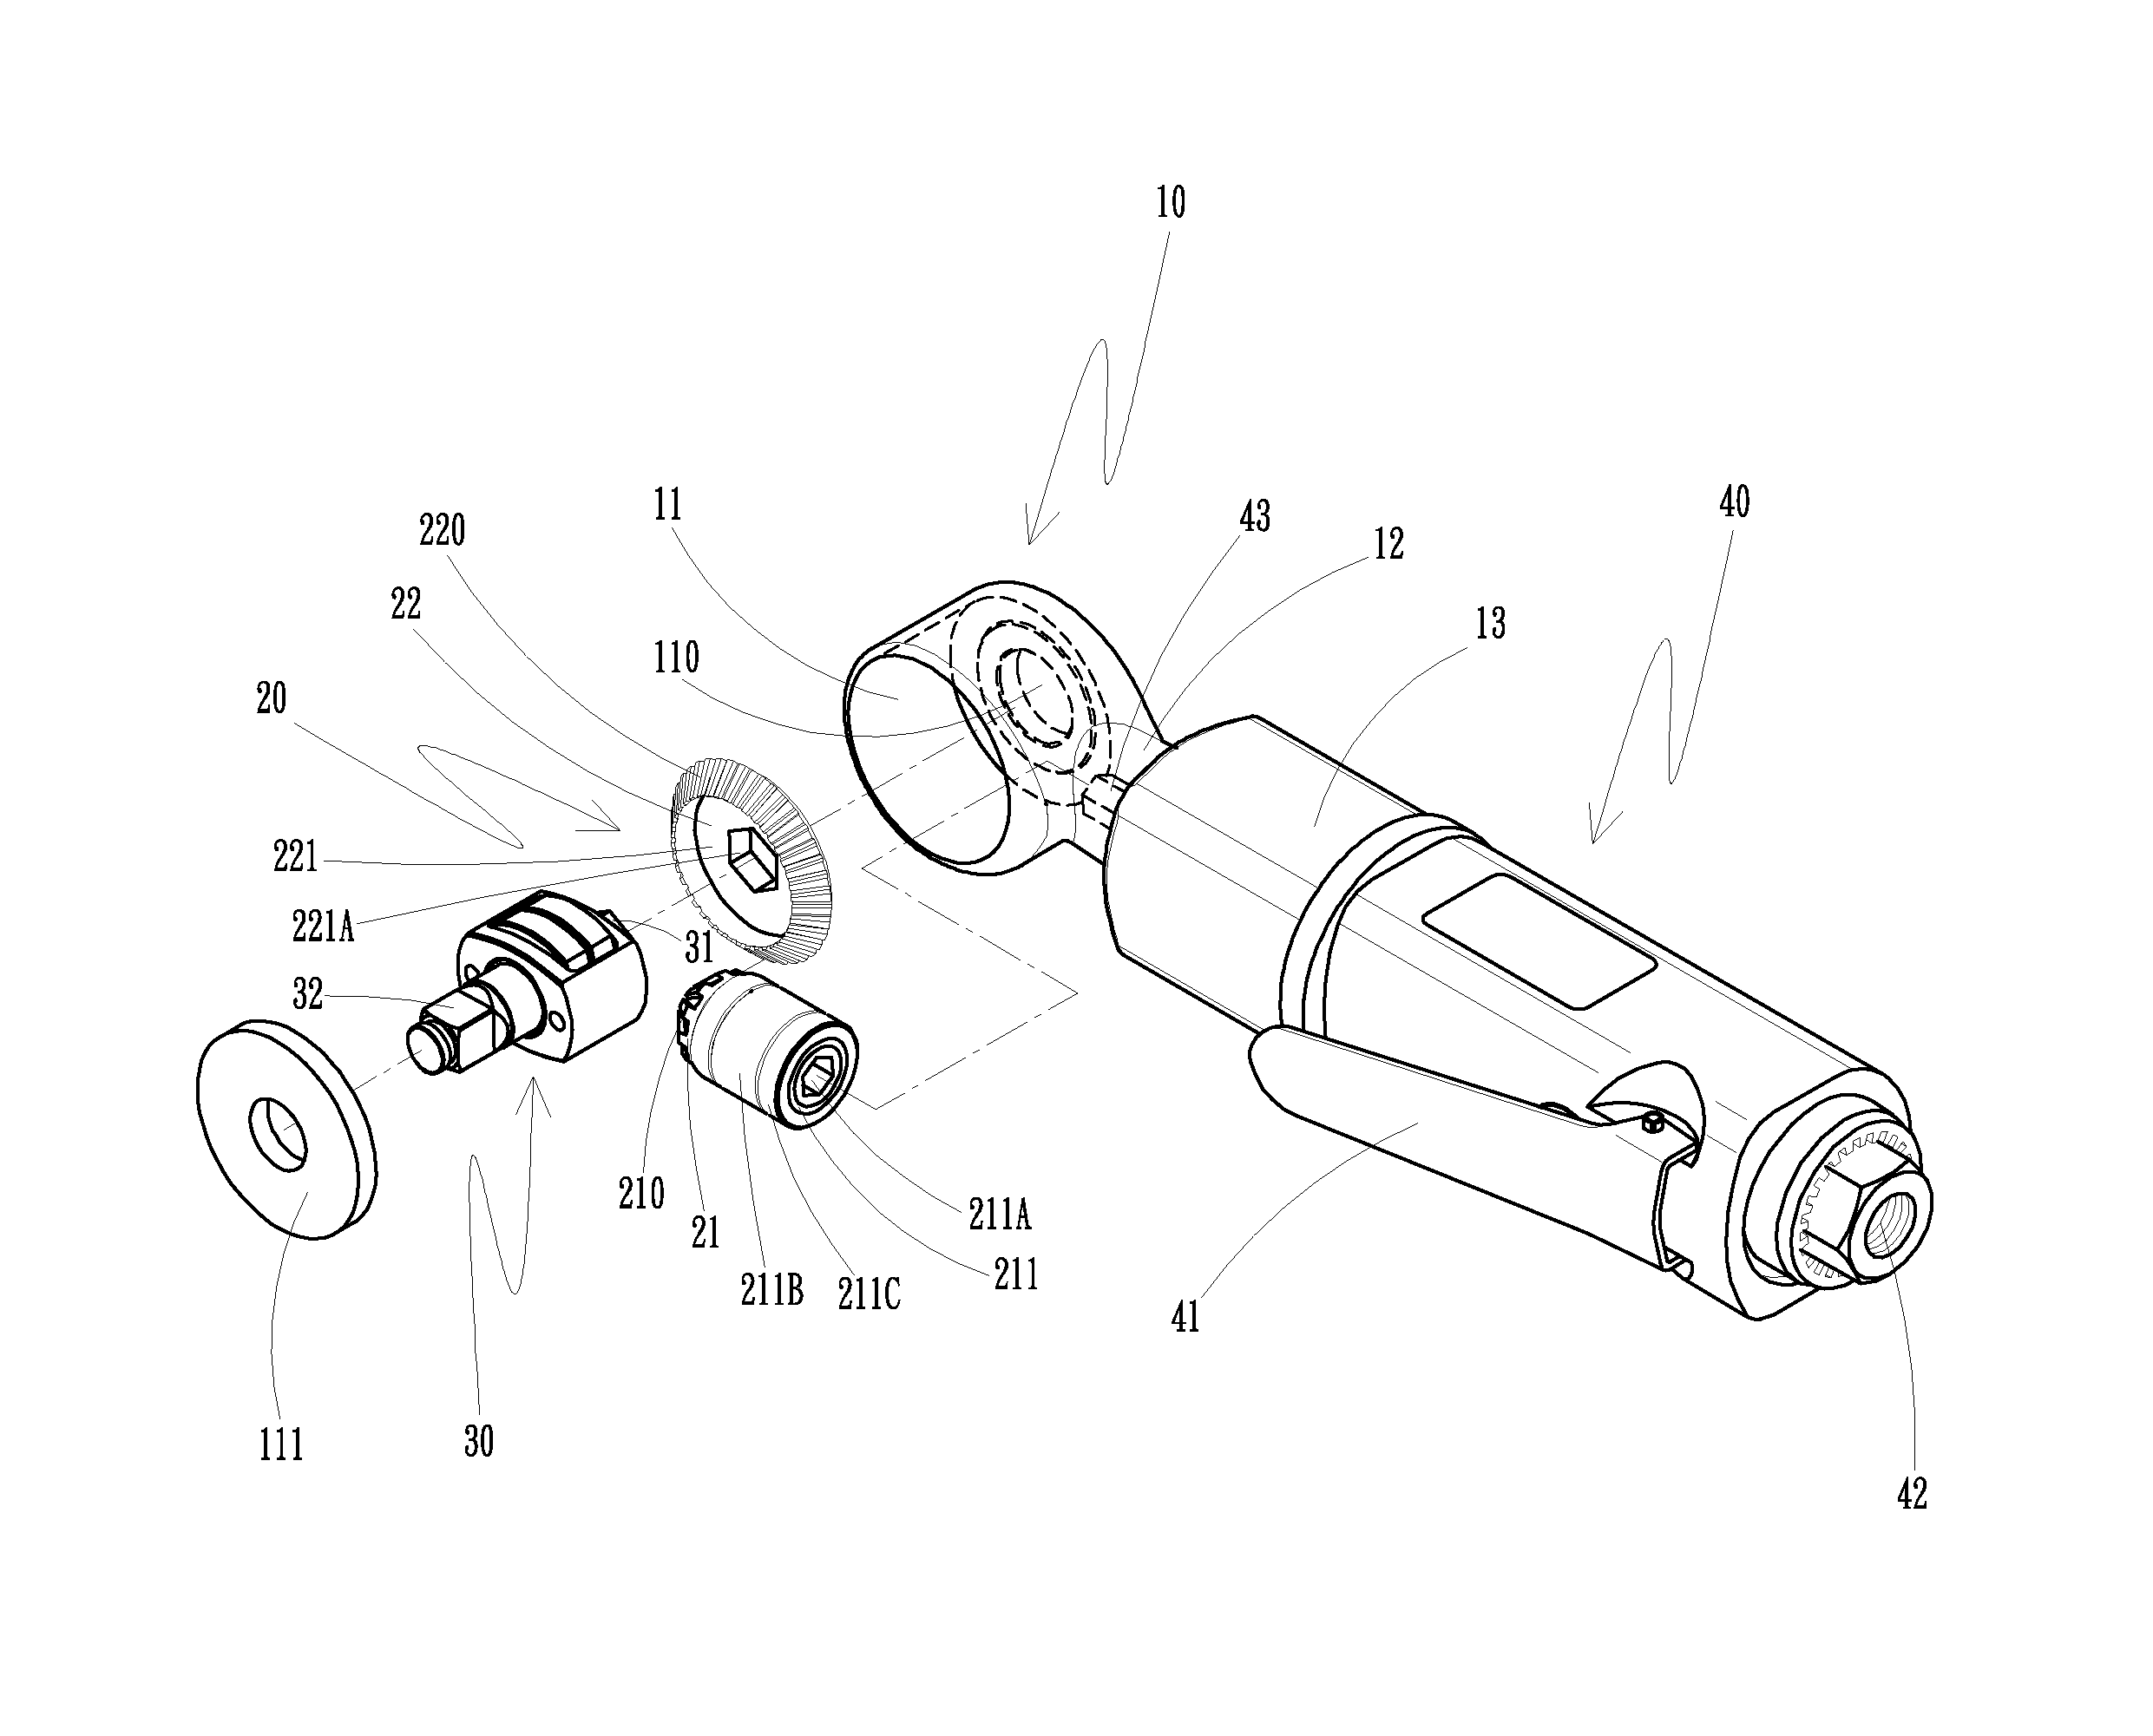 Pneumatic spanner structure